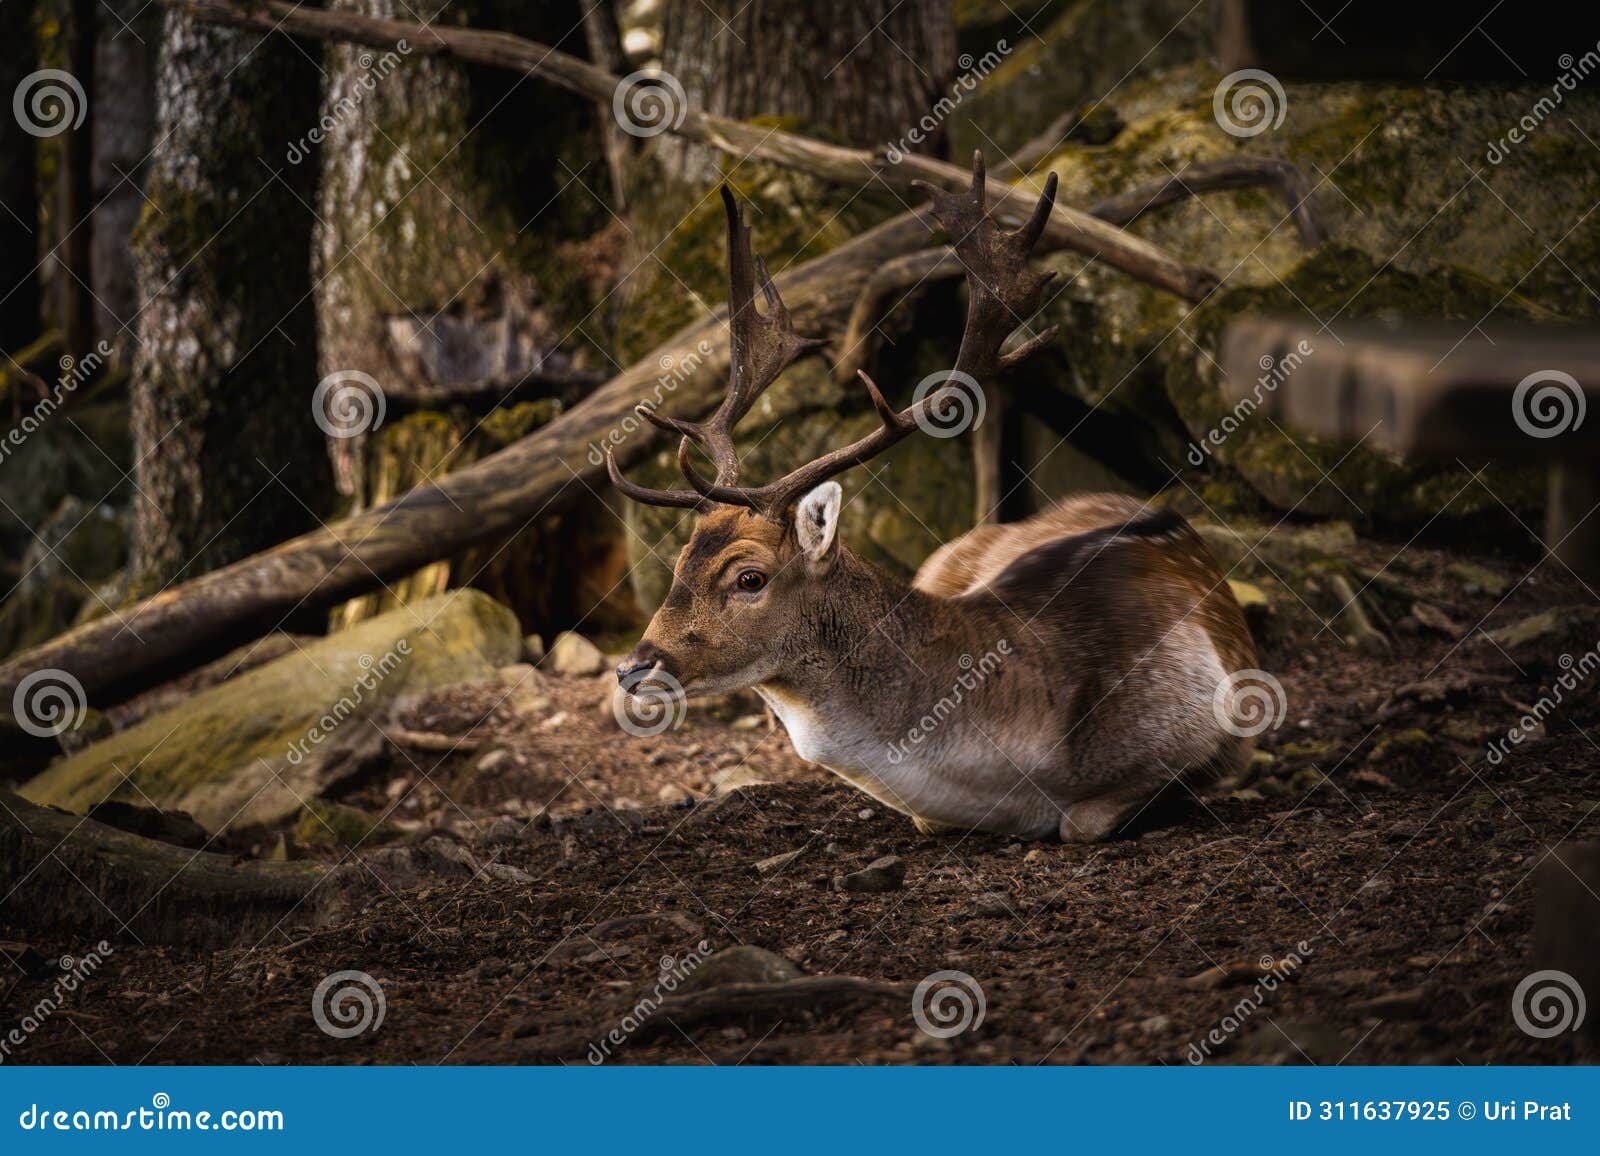 fallow deer in its natural environment. wildlife conservation concept. dama dama